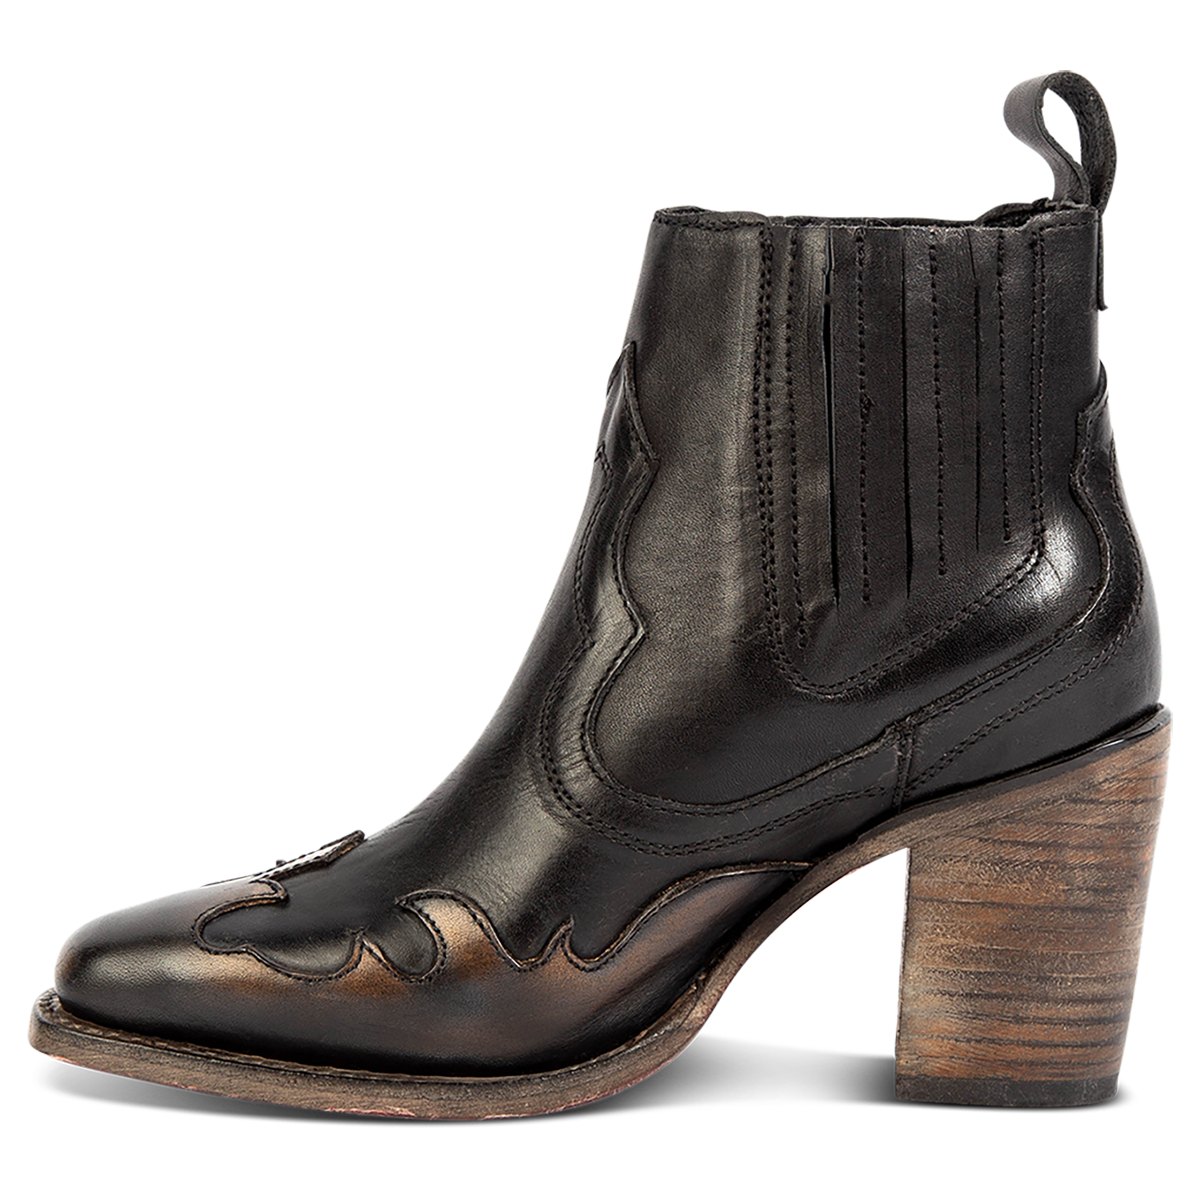 Inside view showing FREEBIRD women's Paula black multi contrast leather overlay bootie with gore detailing, stacked heel and heel leather pull tab